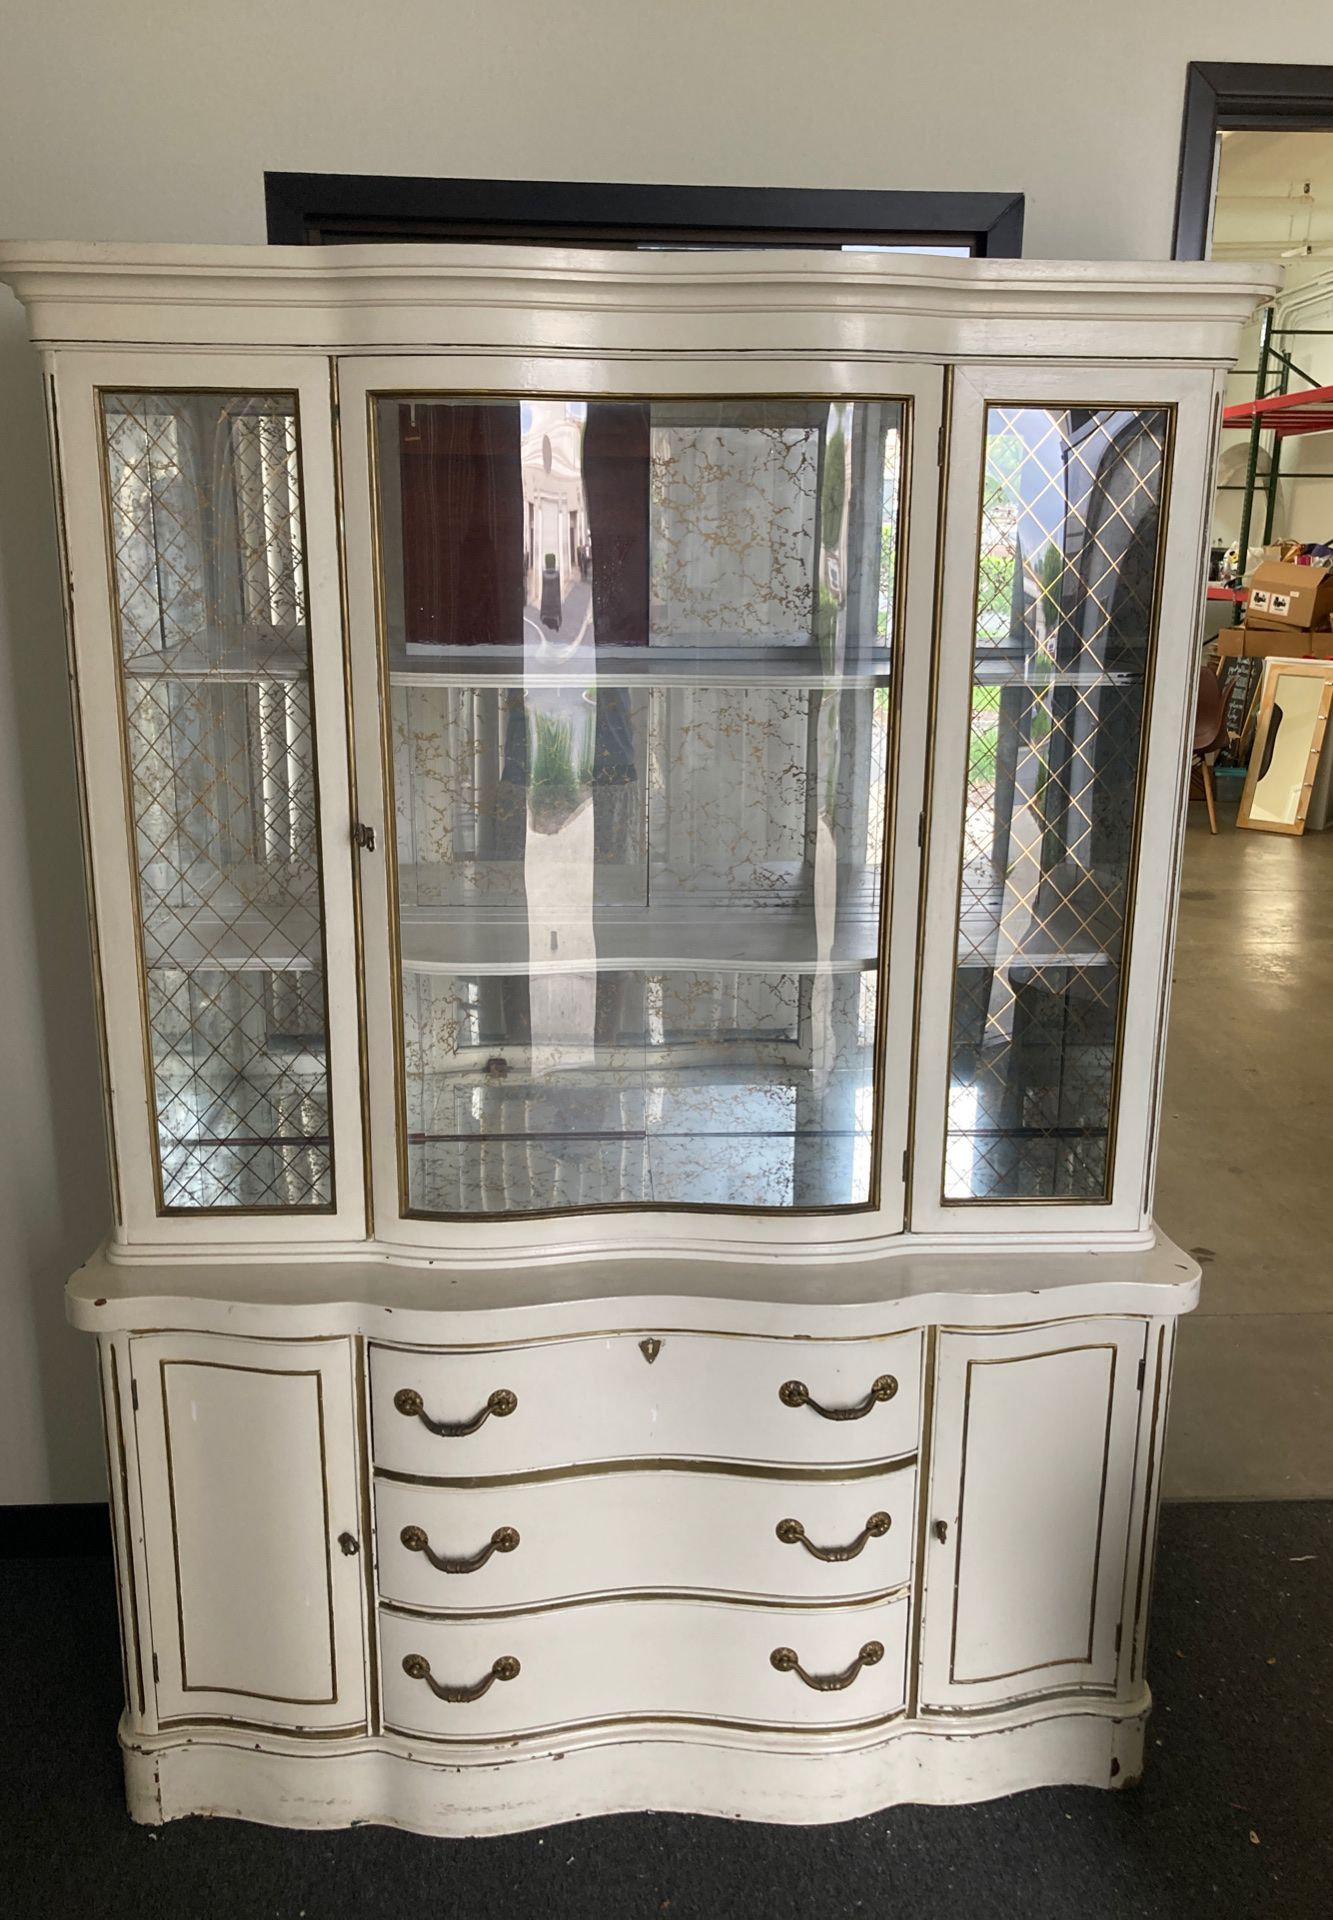 Antique hutch with curved glass - good condition for age